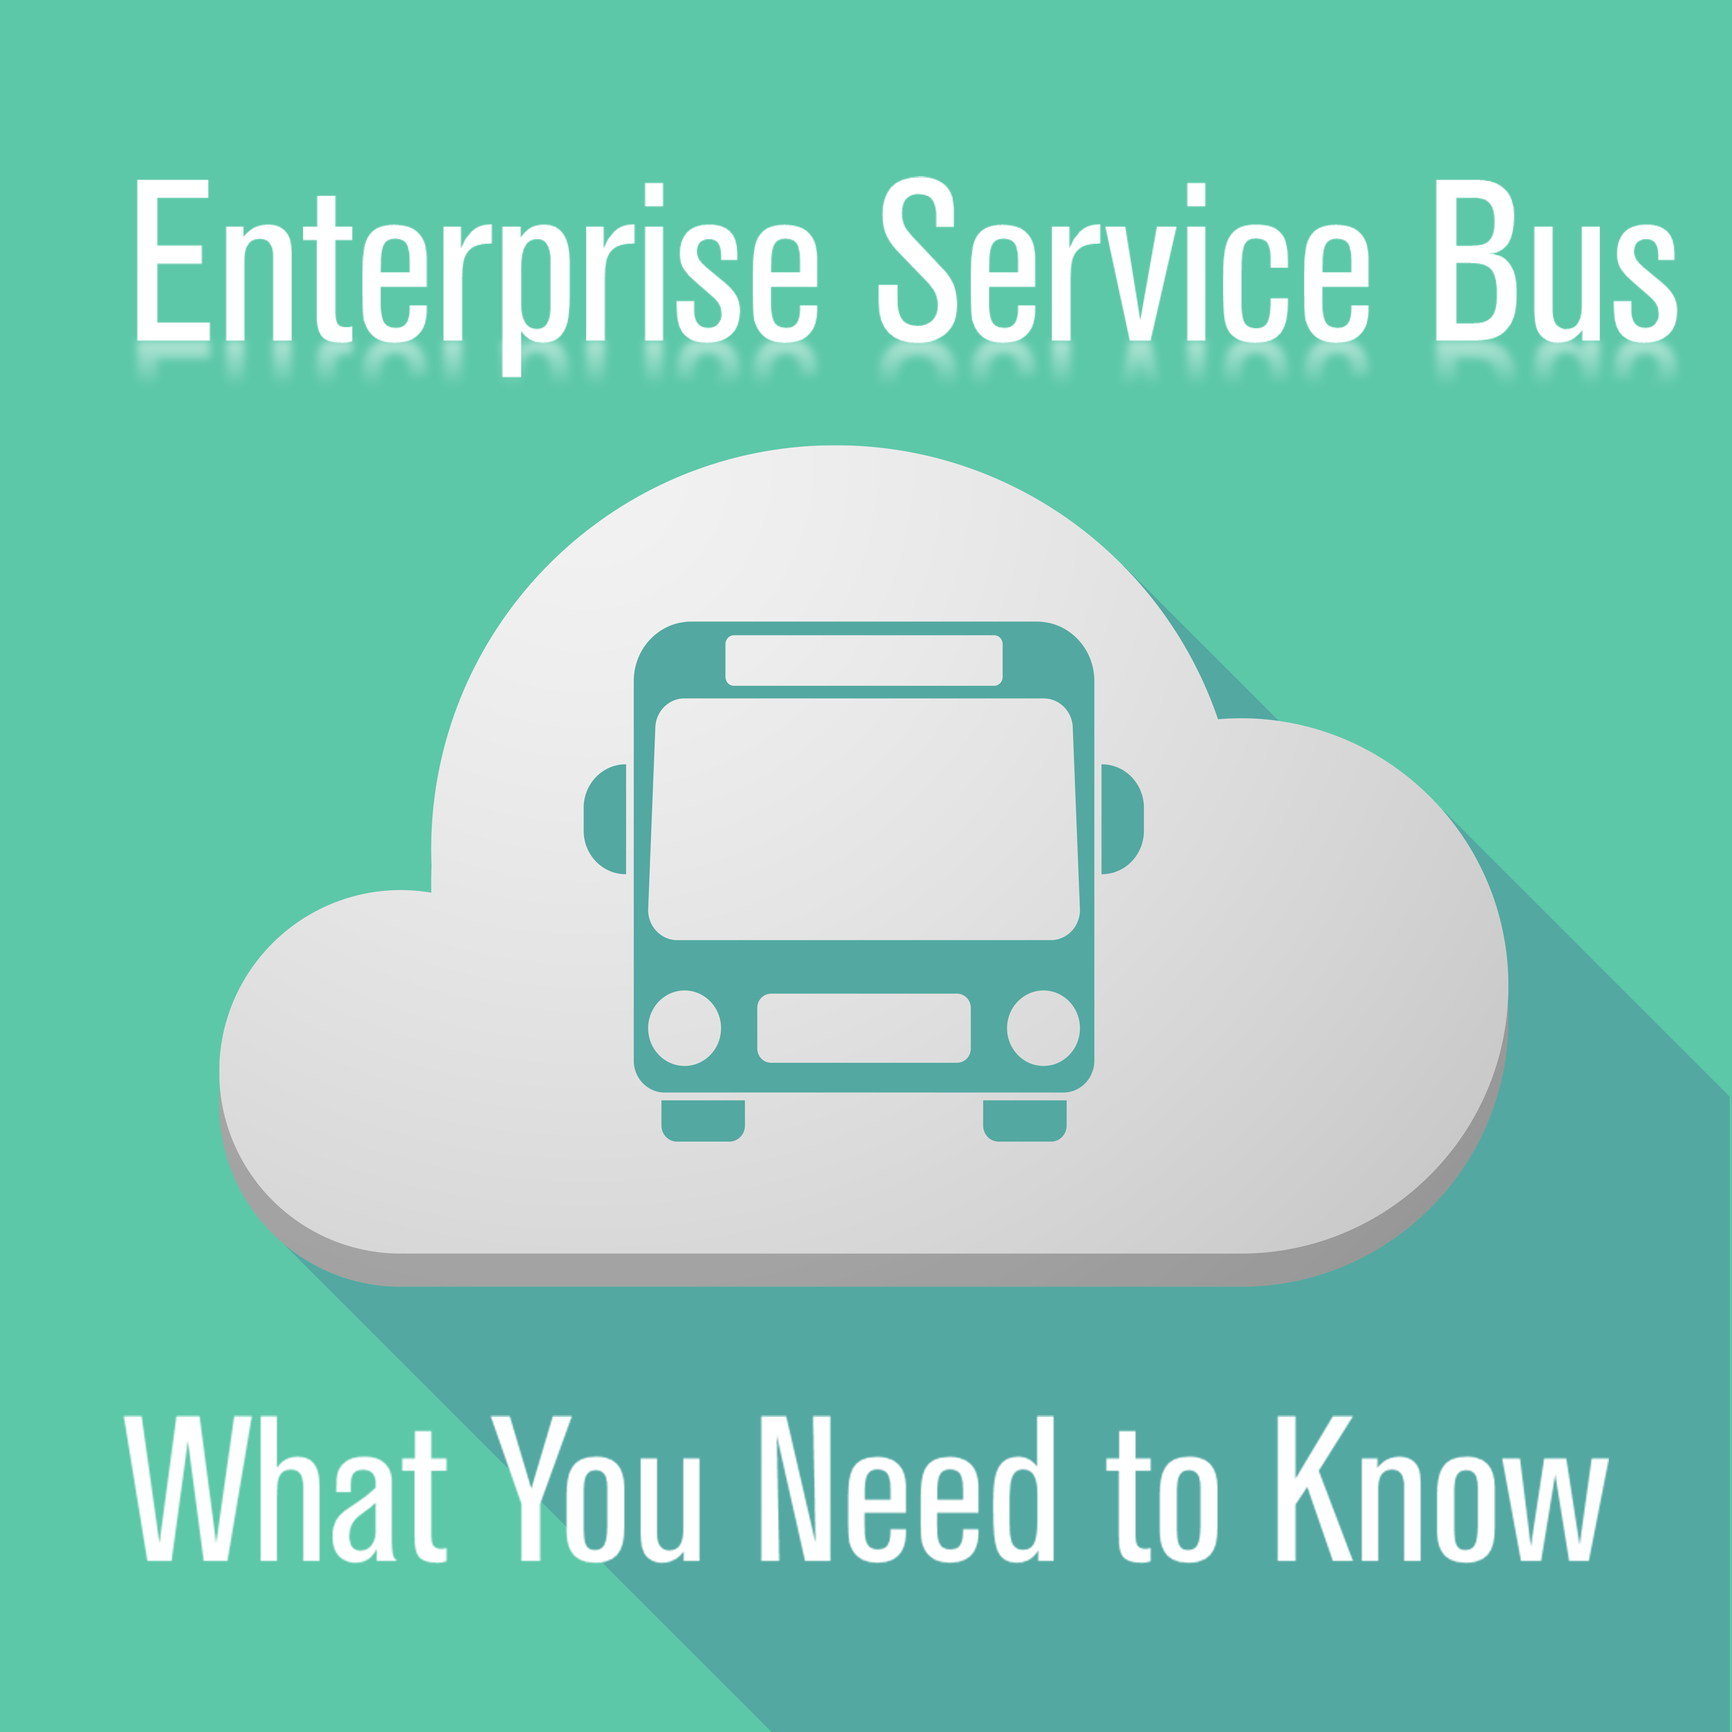 An ESB (Enterprise Service Bus) is an approach to IT architecture